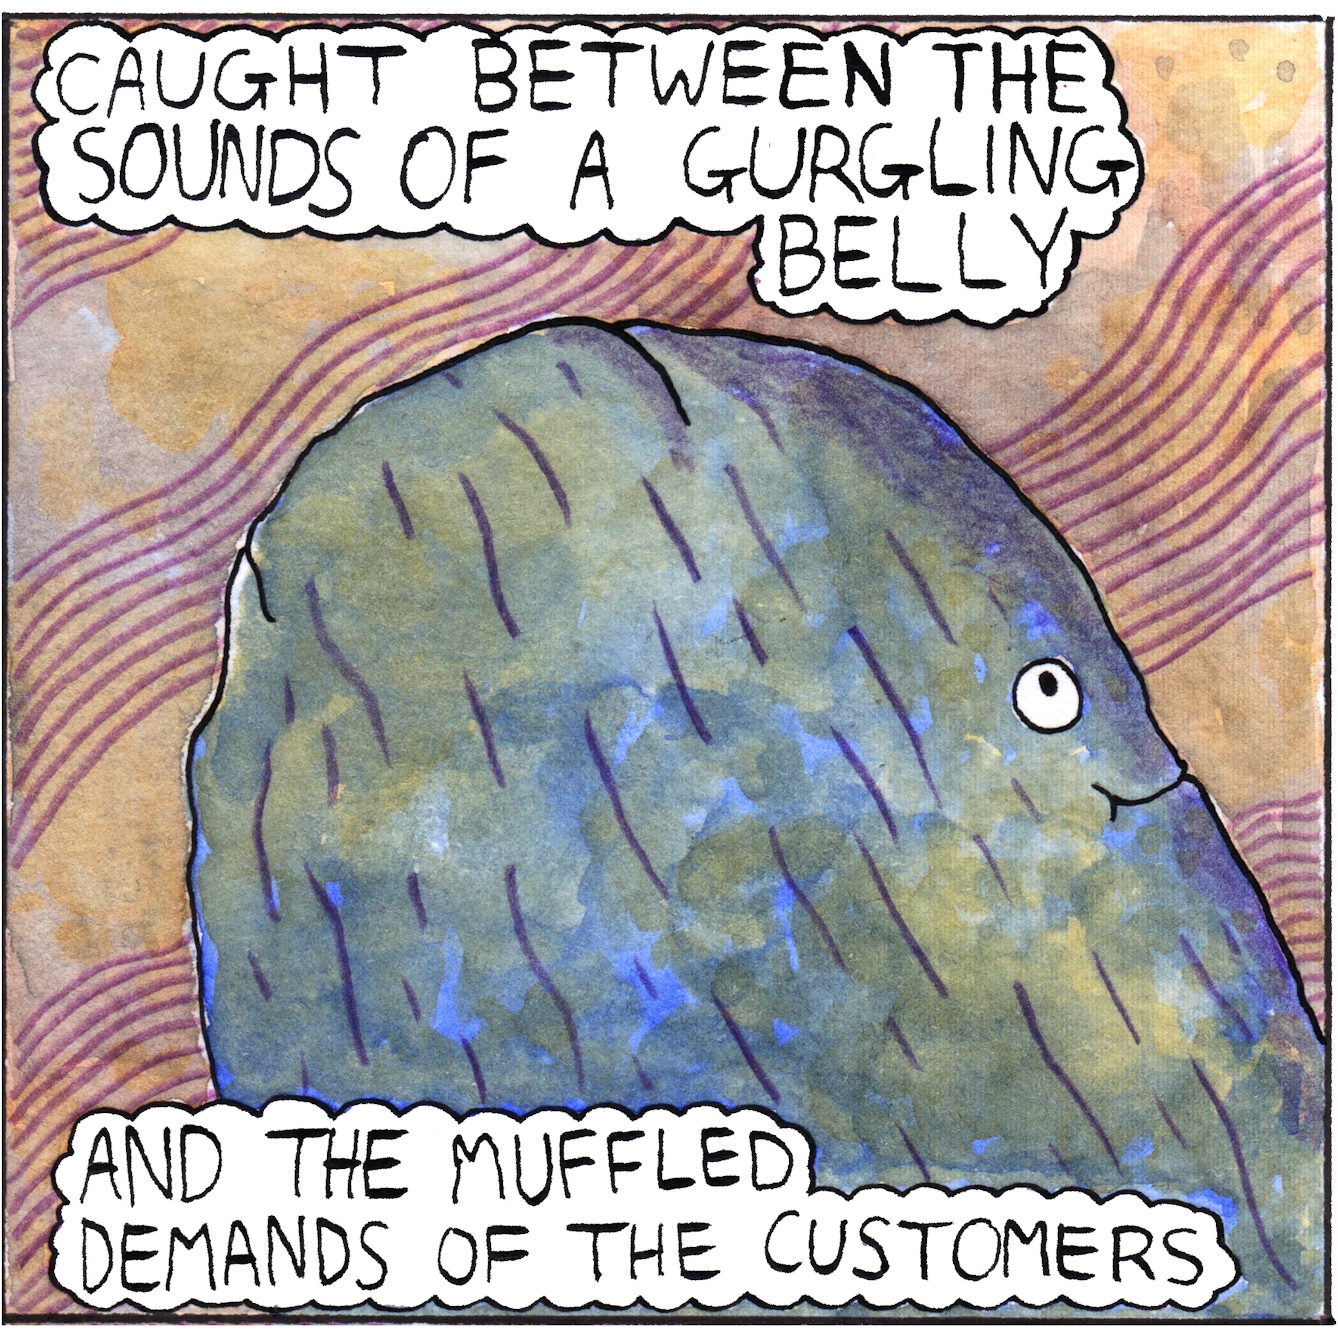 Panel 2 of the web comic 'Nutmeg': A close of side view of the nutmeg’s smiling face fills most of the panel. The text bubbles read “Caught between the sounds of a gurgling belly and the muffled demands of the customers”. 